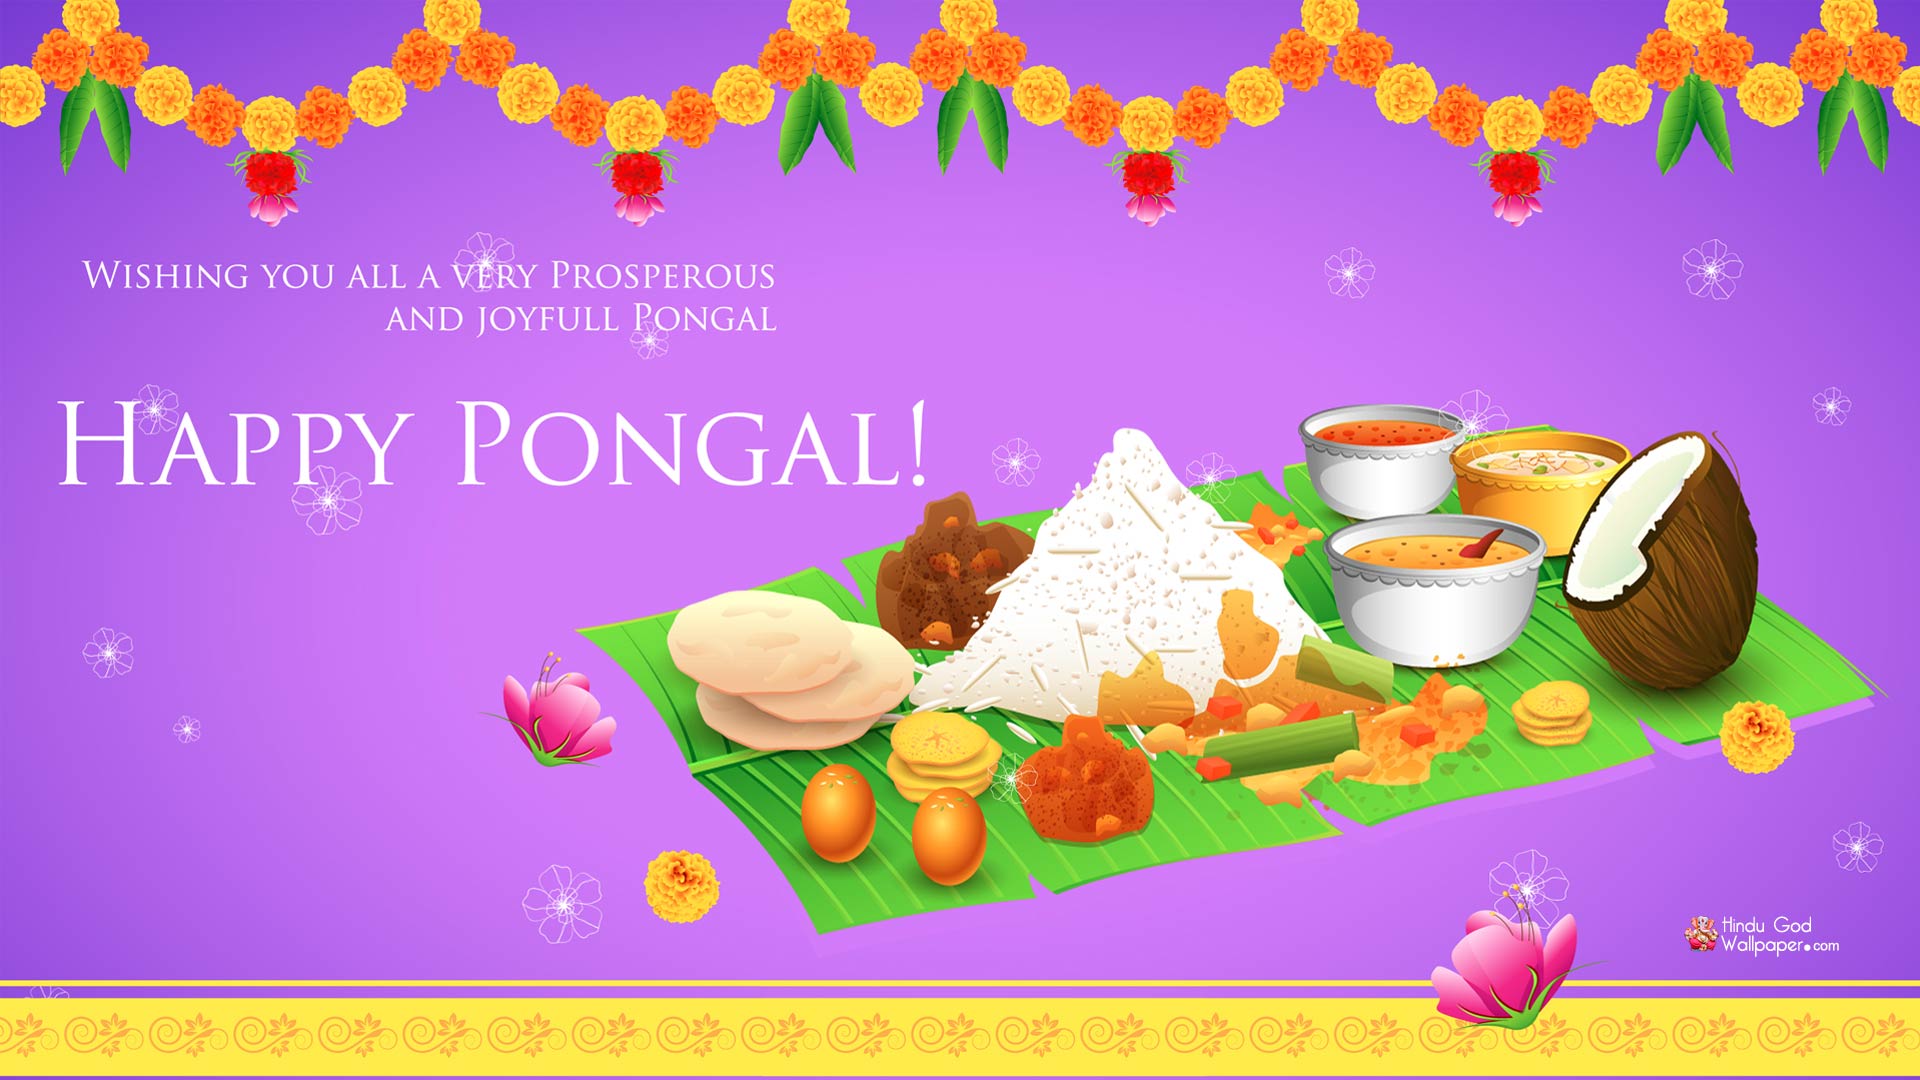 Pongal Wallpapers, HD Images, Pictures & Photos Free Download